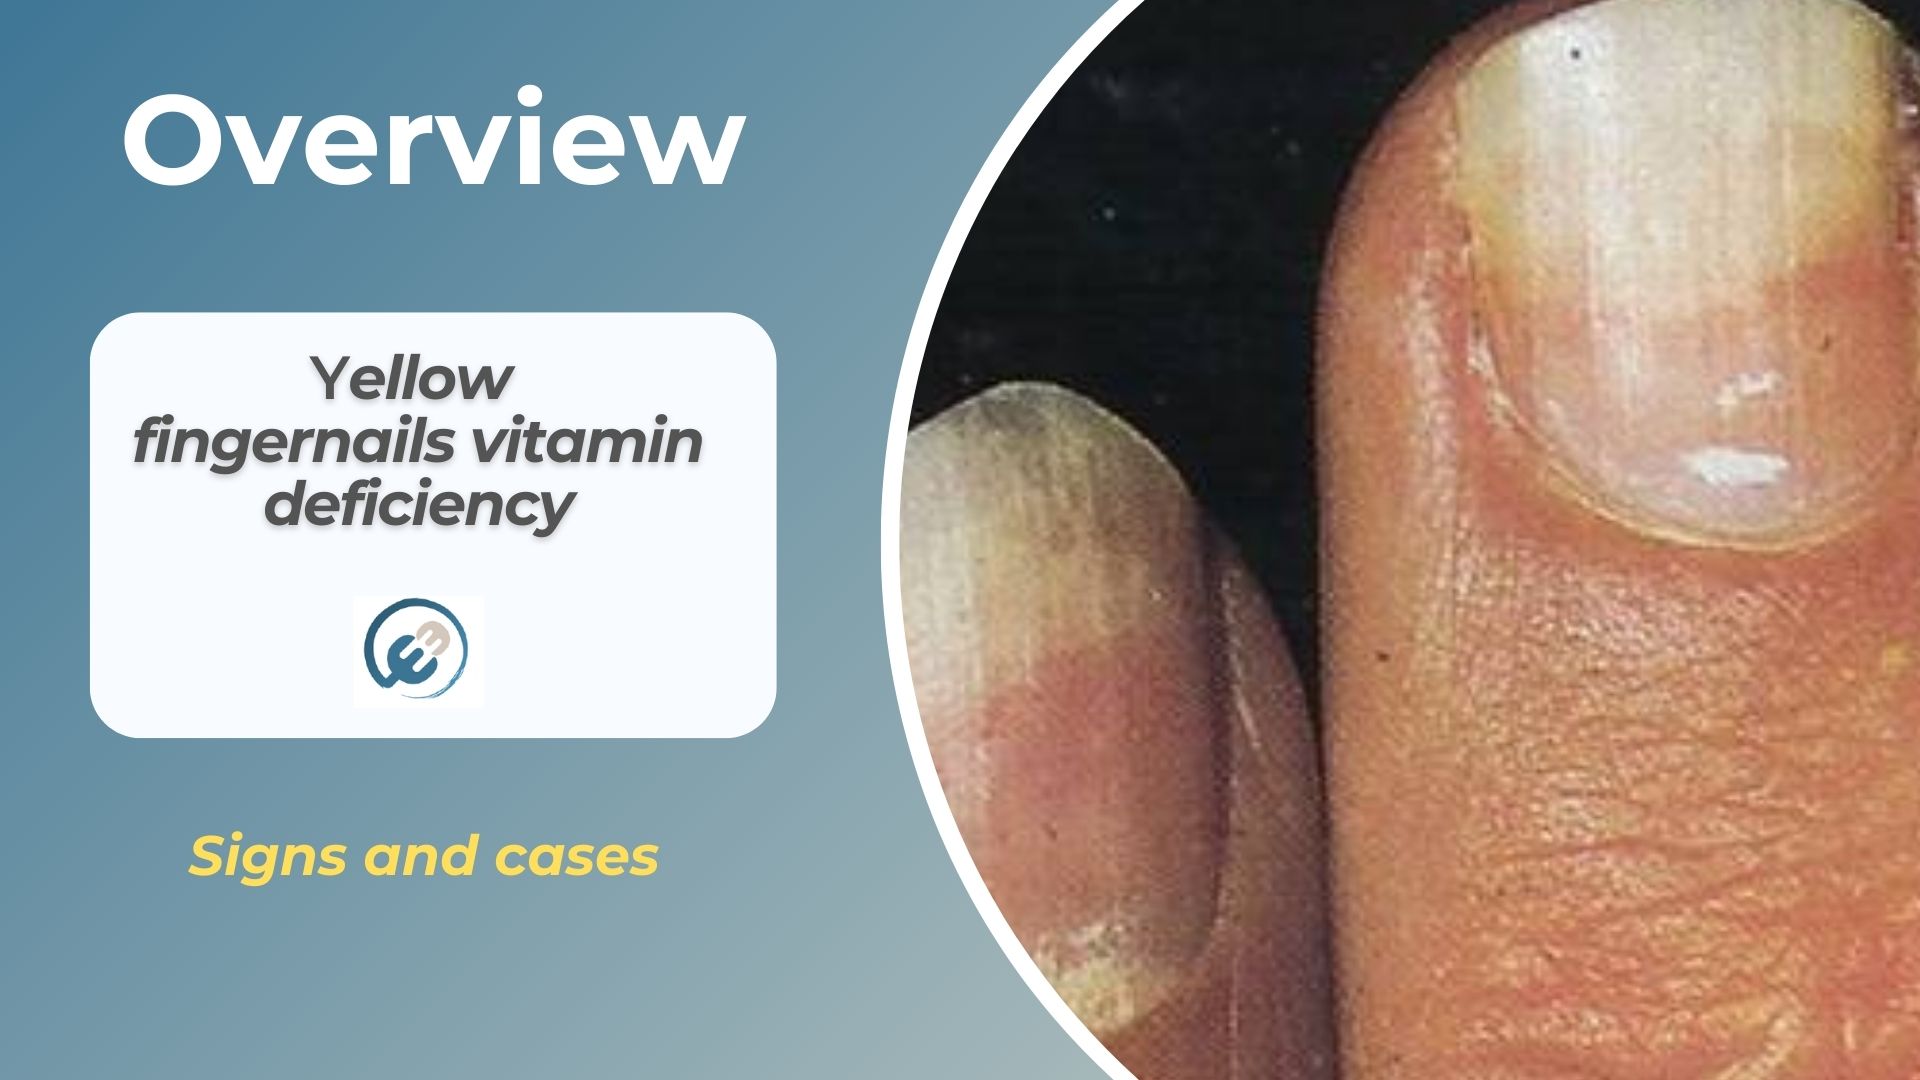 Signs and cases of yellow fingernails vitamin deficiency and remedies